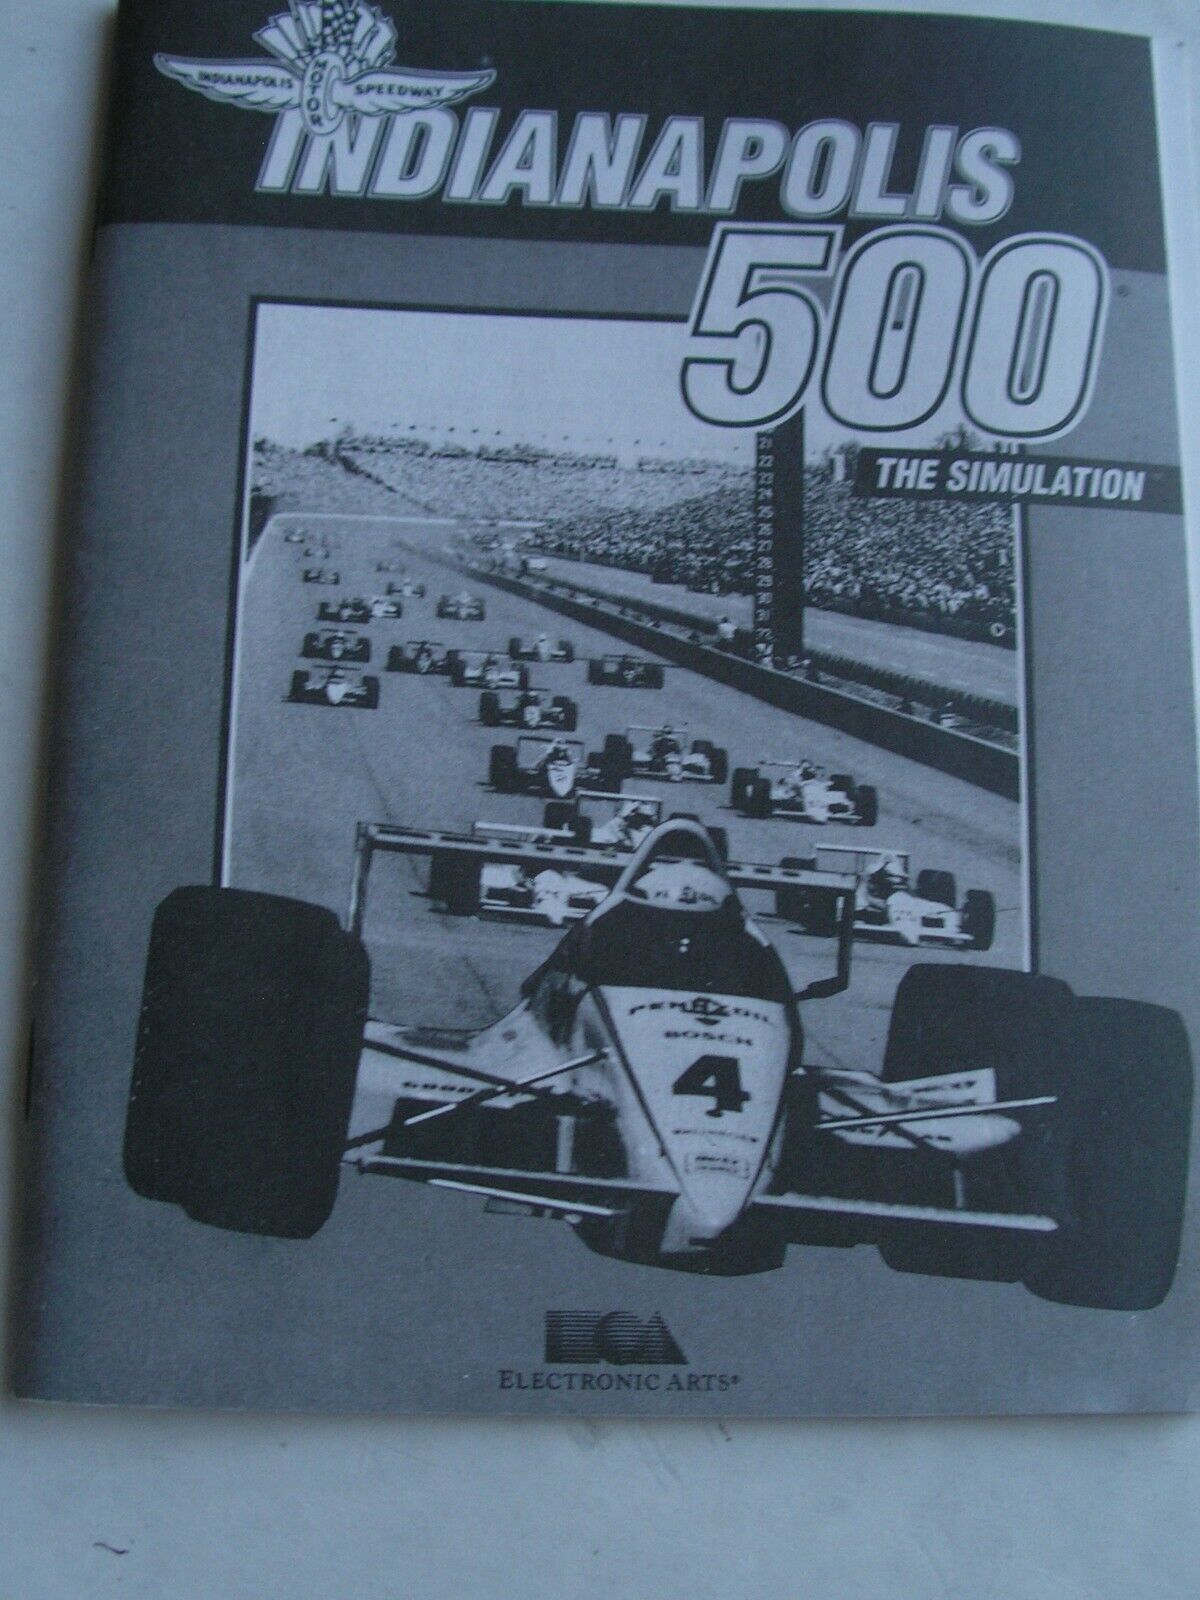 Vintage Indianapolis 500 The Simulation, Manual only for PC Game 